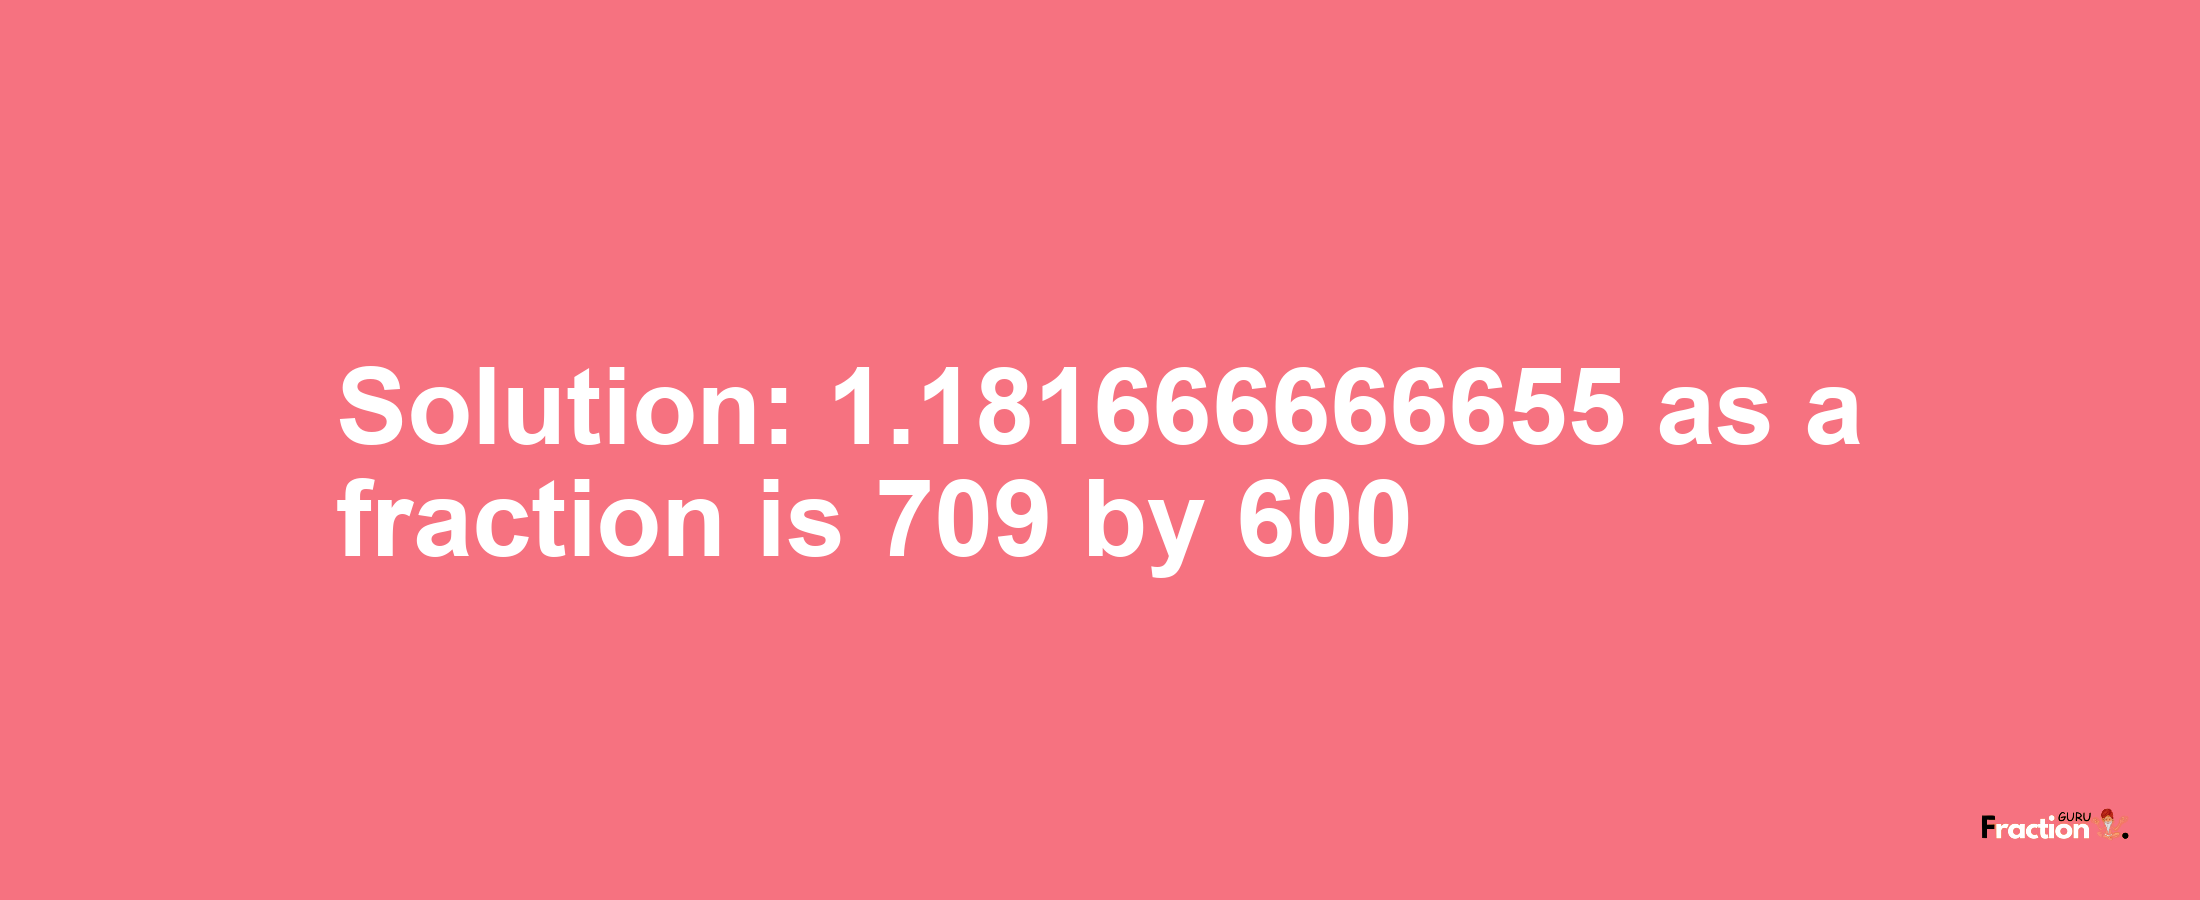 Solution:1.181666666655 as a fraction is 709/600